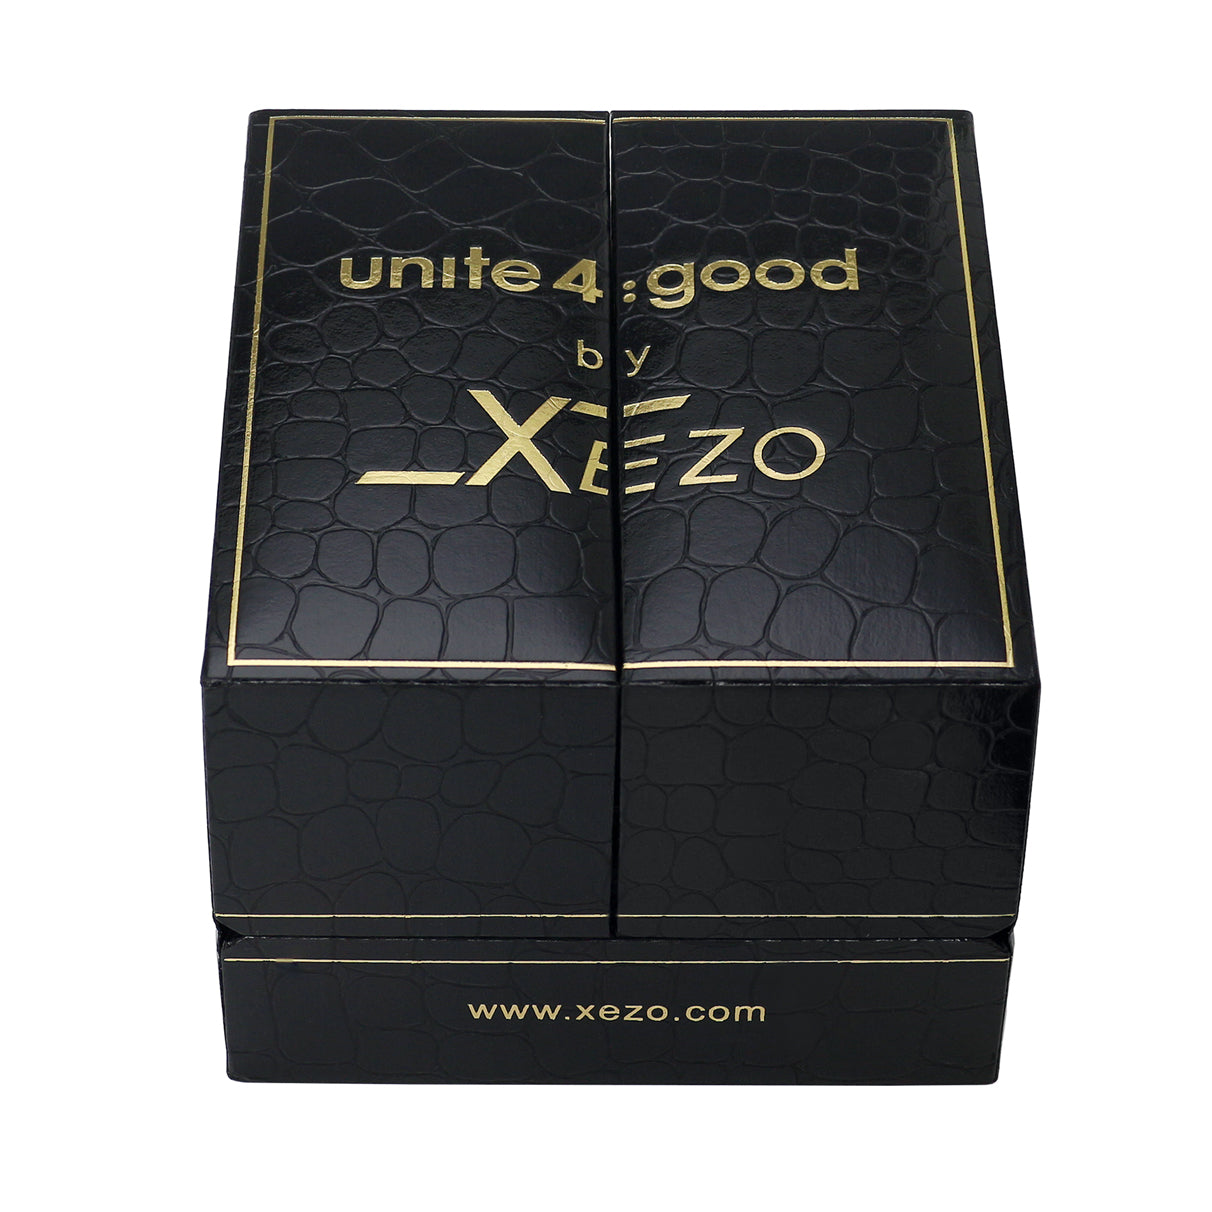 Xezo -  Black gift box of the Air Commando D45-G watch  with "unite 4: good by Xezo" printed on top and "www.xezo.com" printed on the front